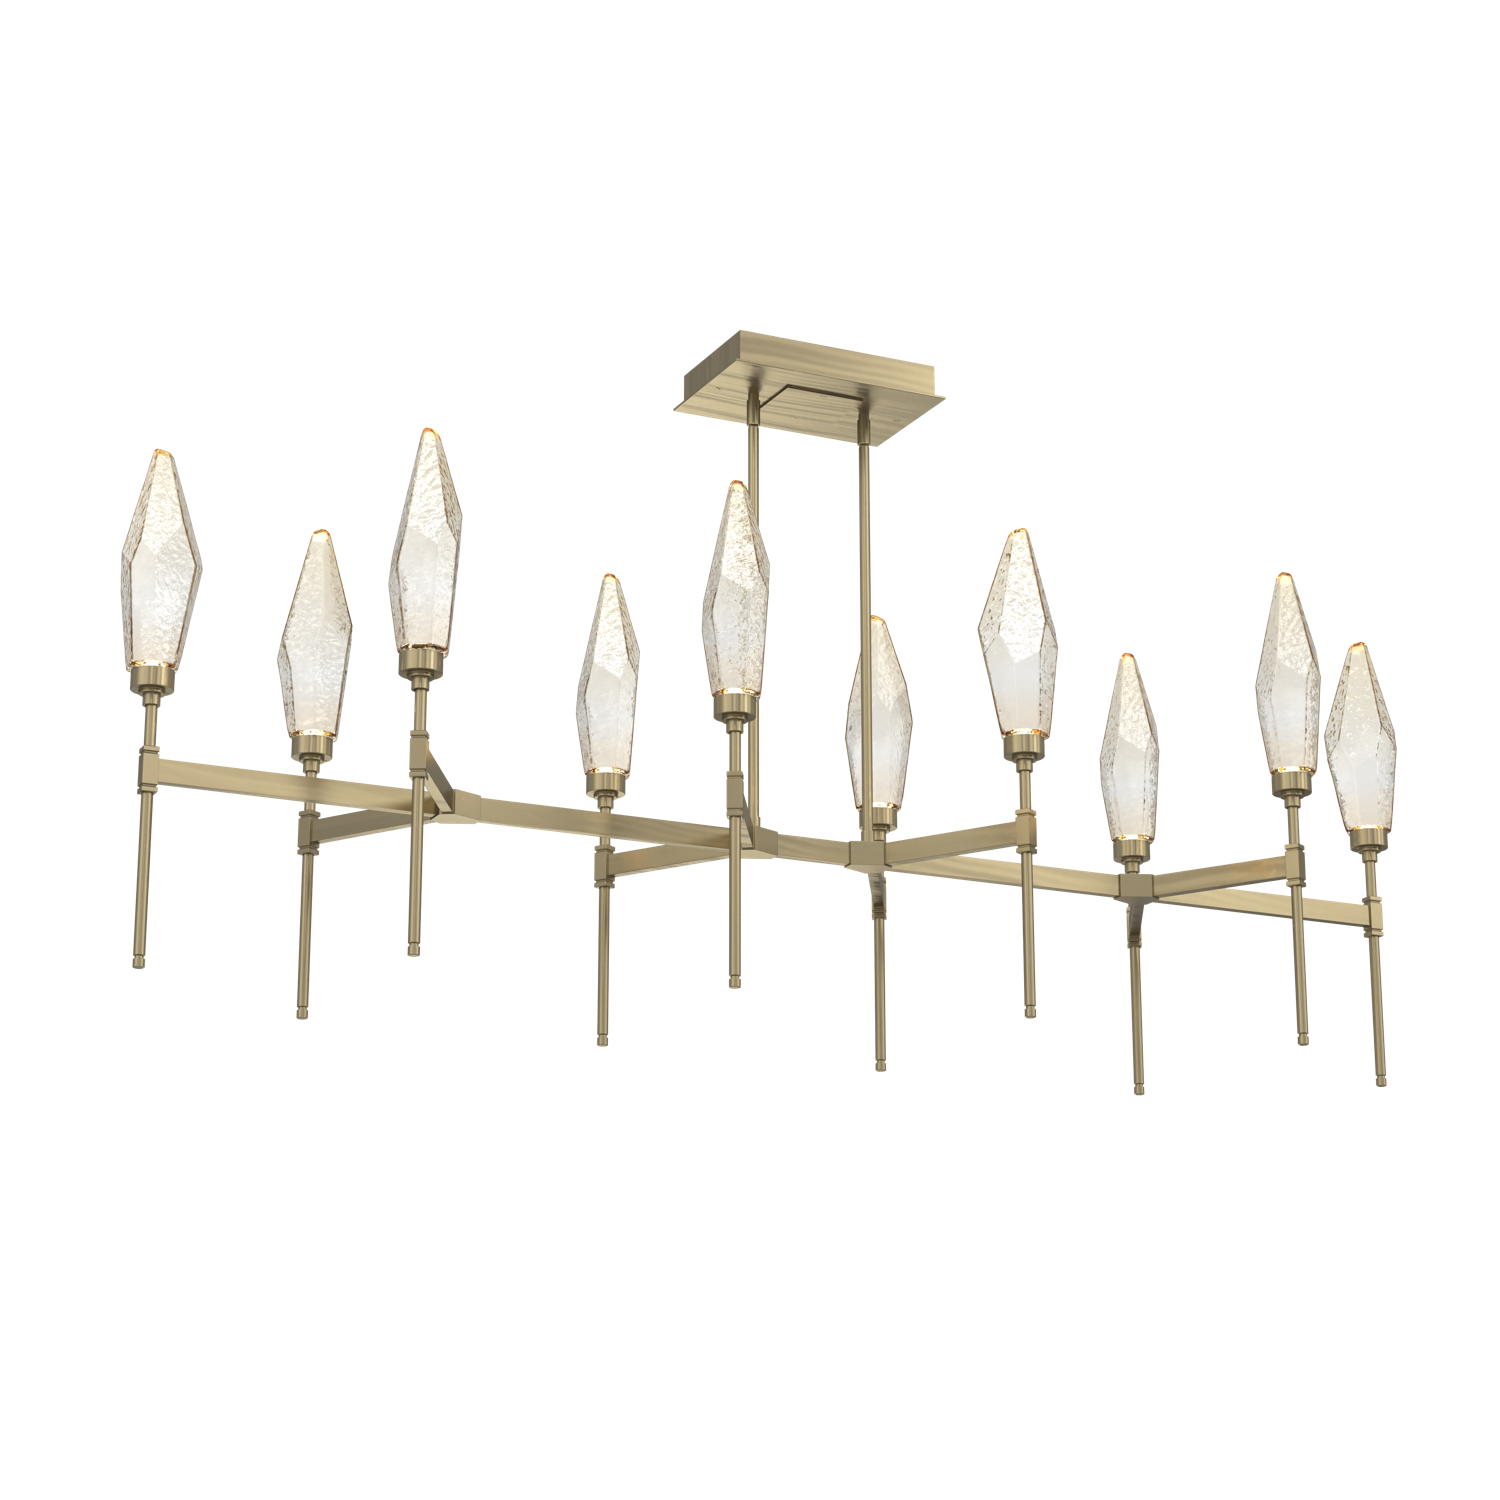 PLB0050-67-HB-CA-Hammerton-Studio-Rock-Crystal-67-inch-linear-belvedere-chandelier-with-heritage-brass-finish-and-chilled-amber-blown-glass-shades-and-LED-lamping